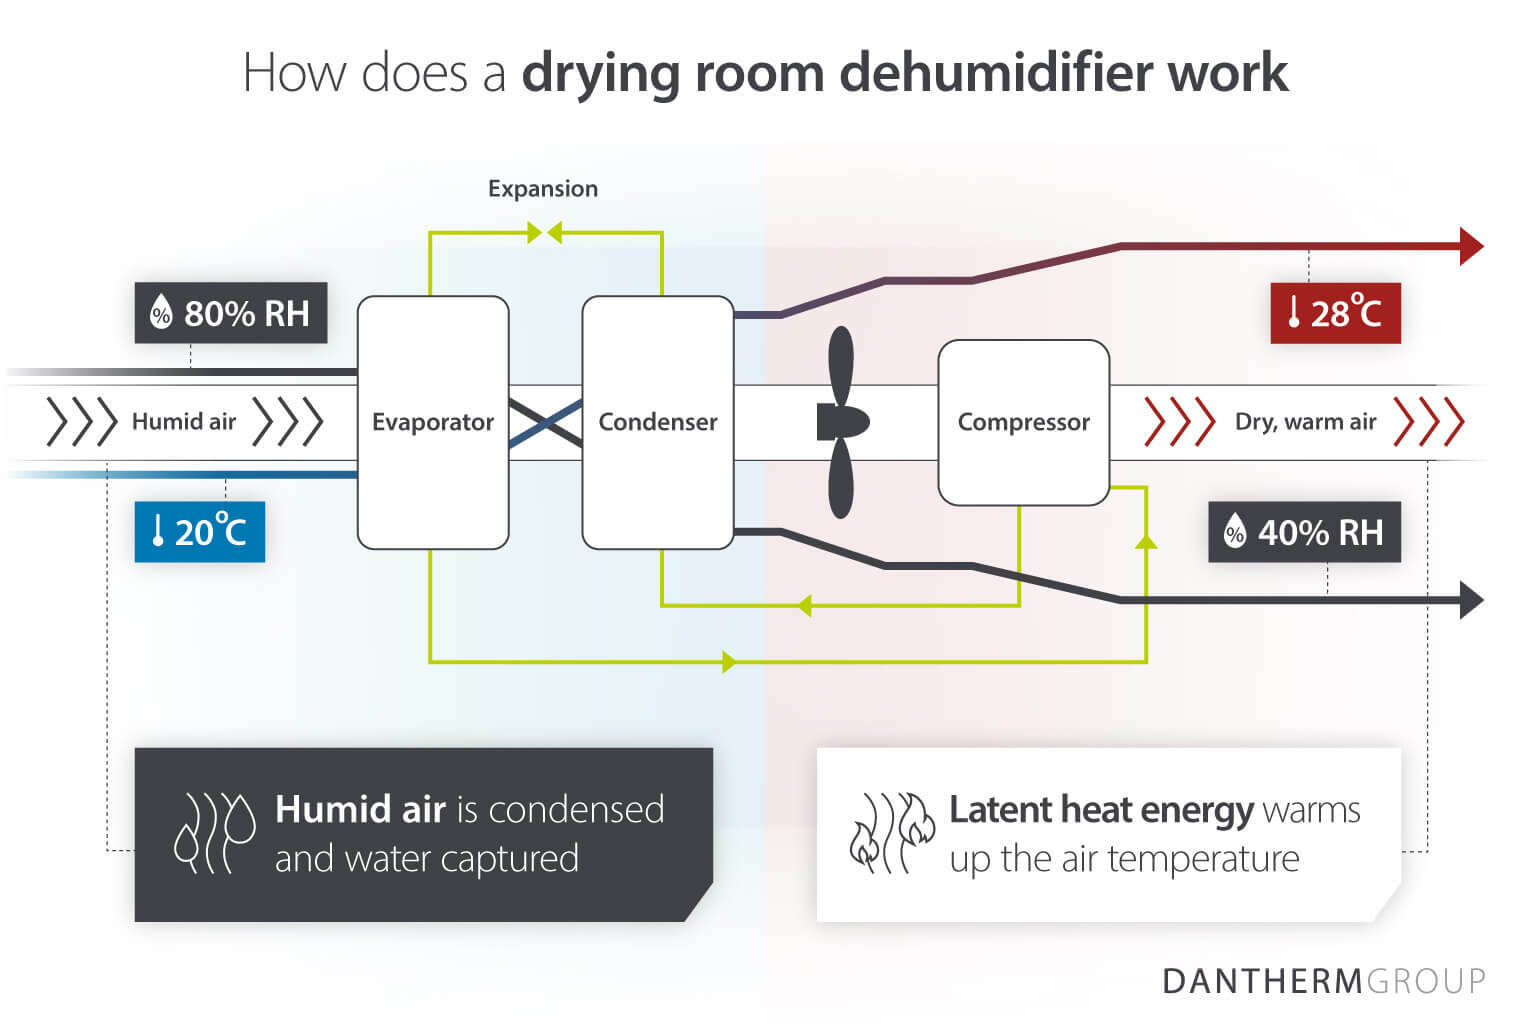 How does a drying room dehumidifier work